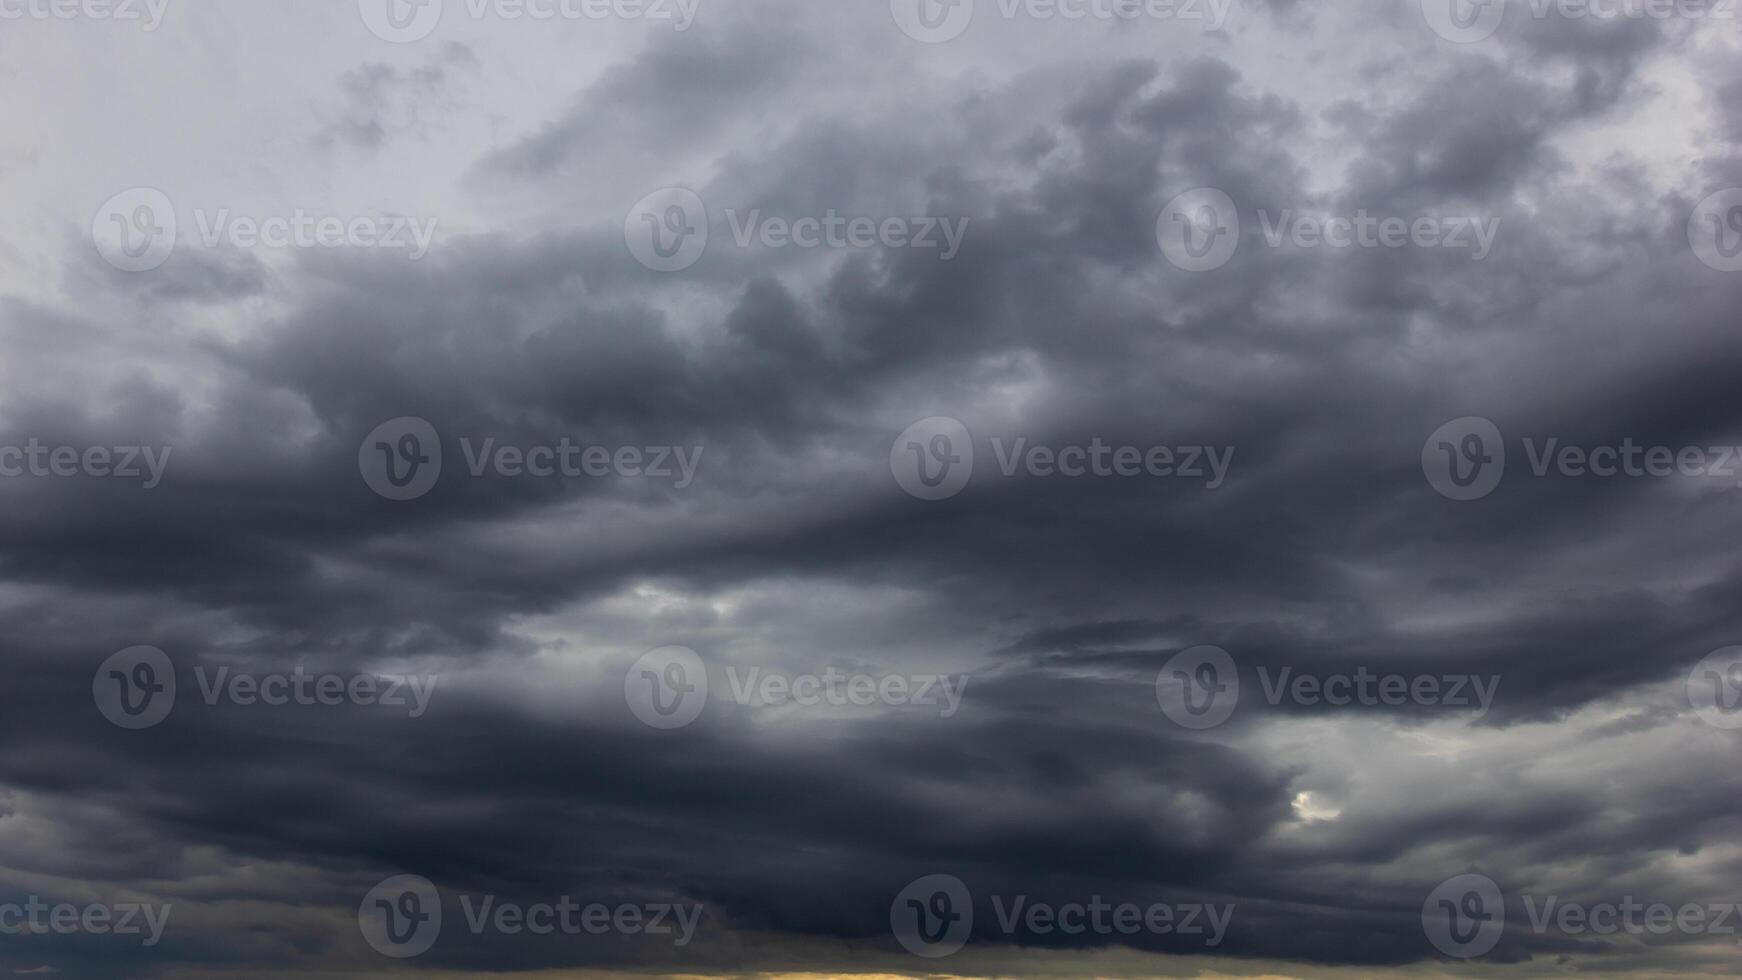 The dark sky with heavy clouds converging and a violent storm before the rain.Bad or moody weather sky and environment. carbon dioxide emissions, greenhouse effect, global warming, climate change photo